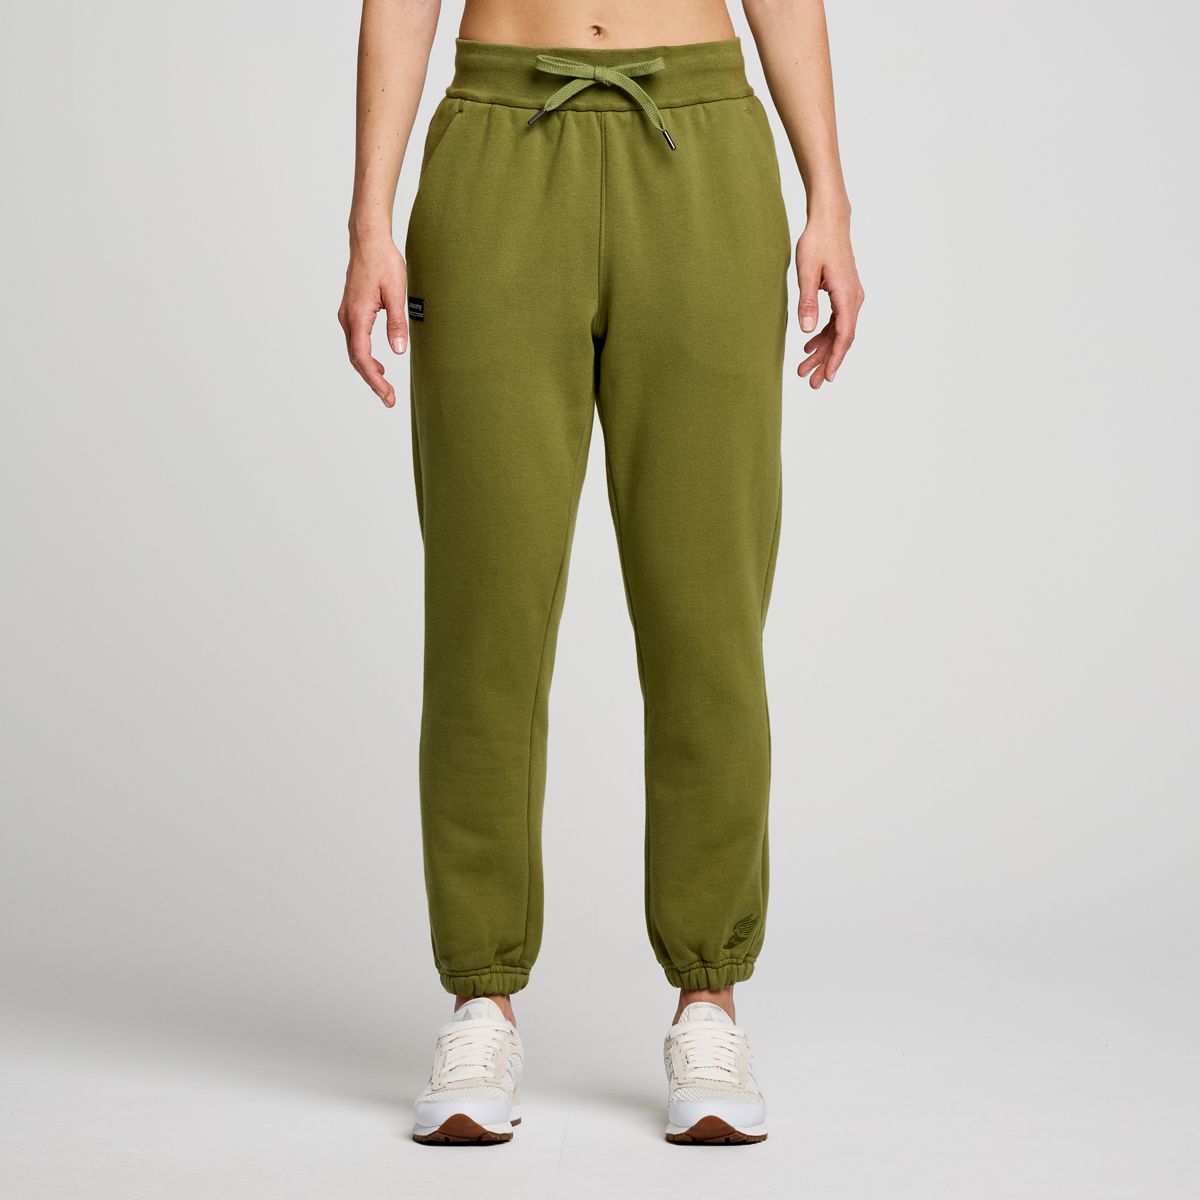 Recovery Sweatpant, Glade Graphic, dynamic